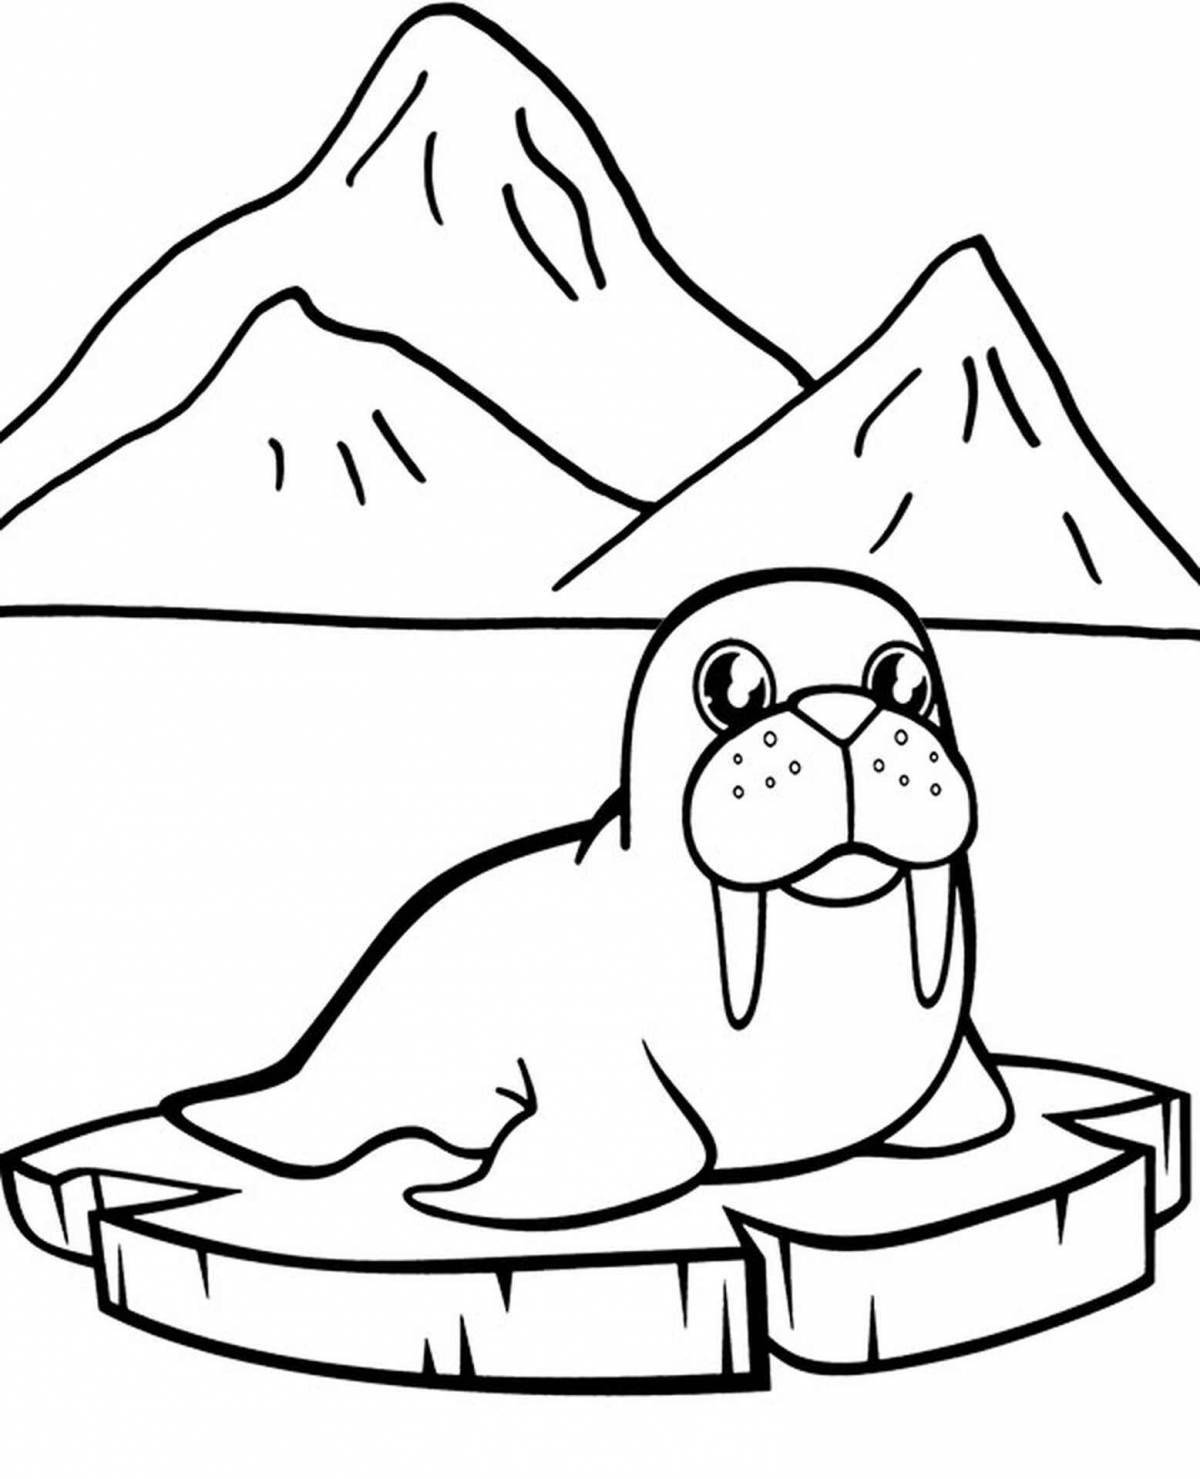 Adorable walrus coloring page for kids